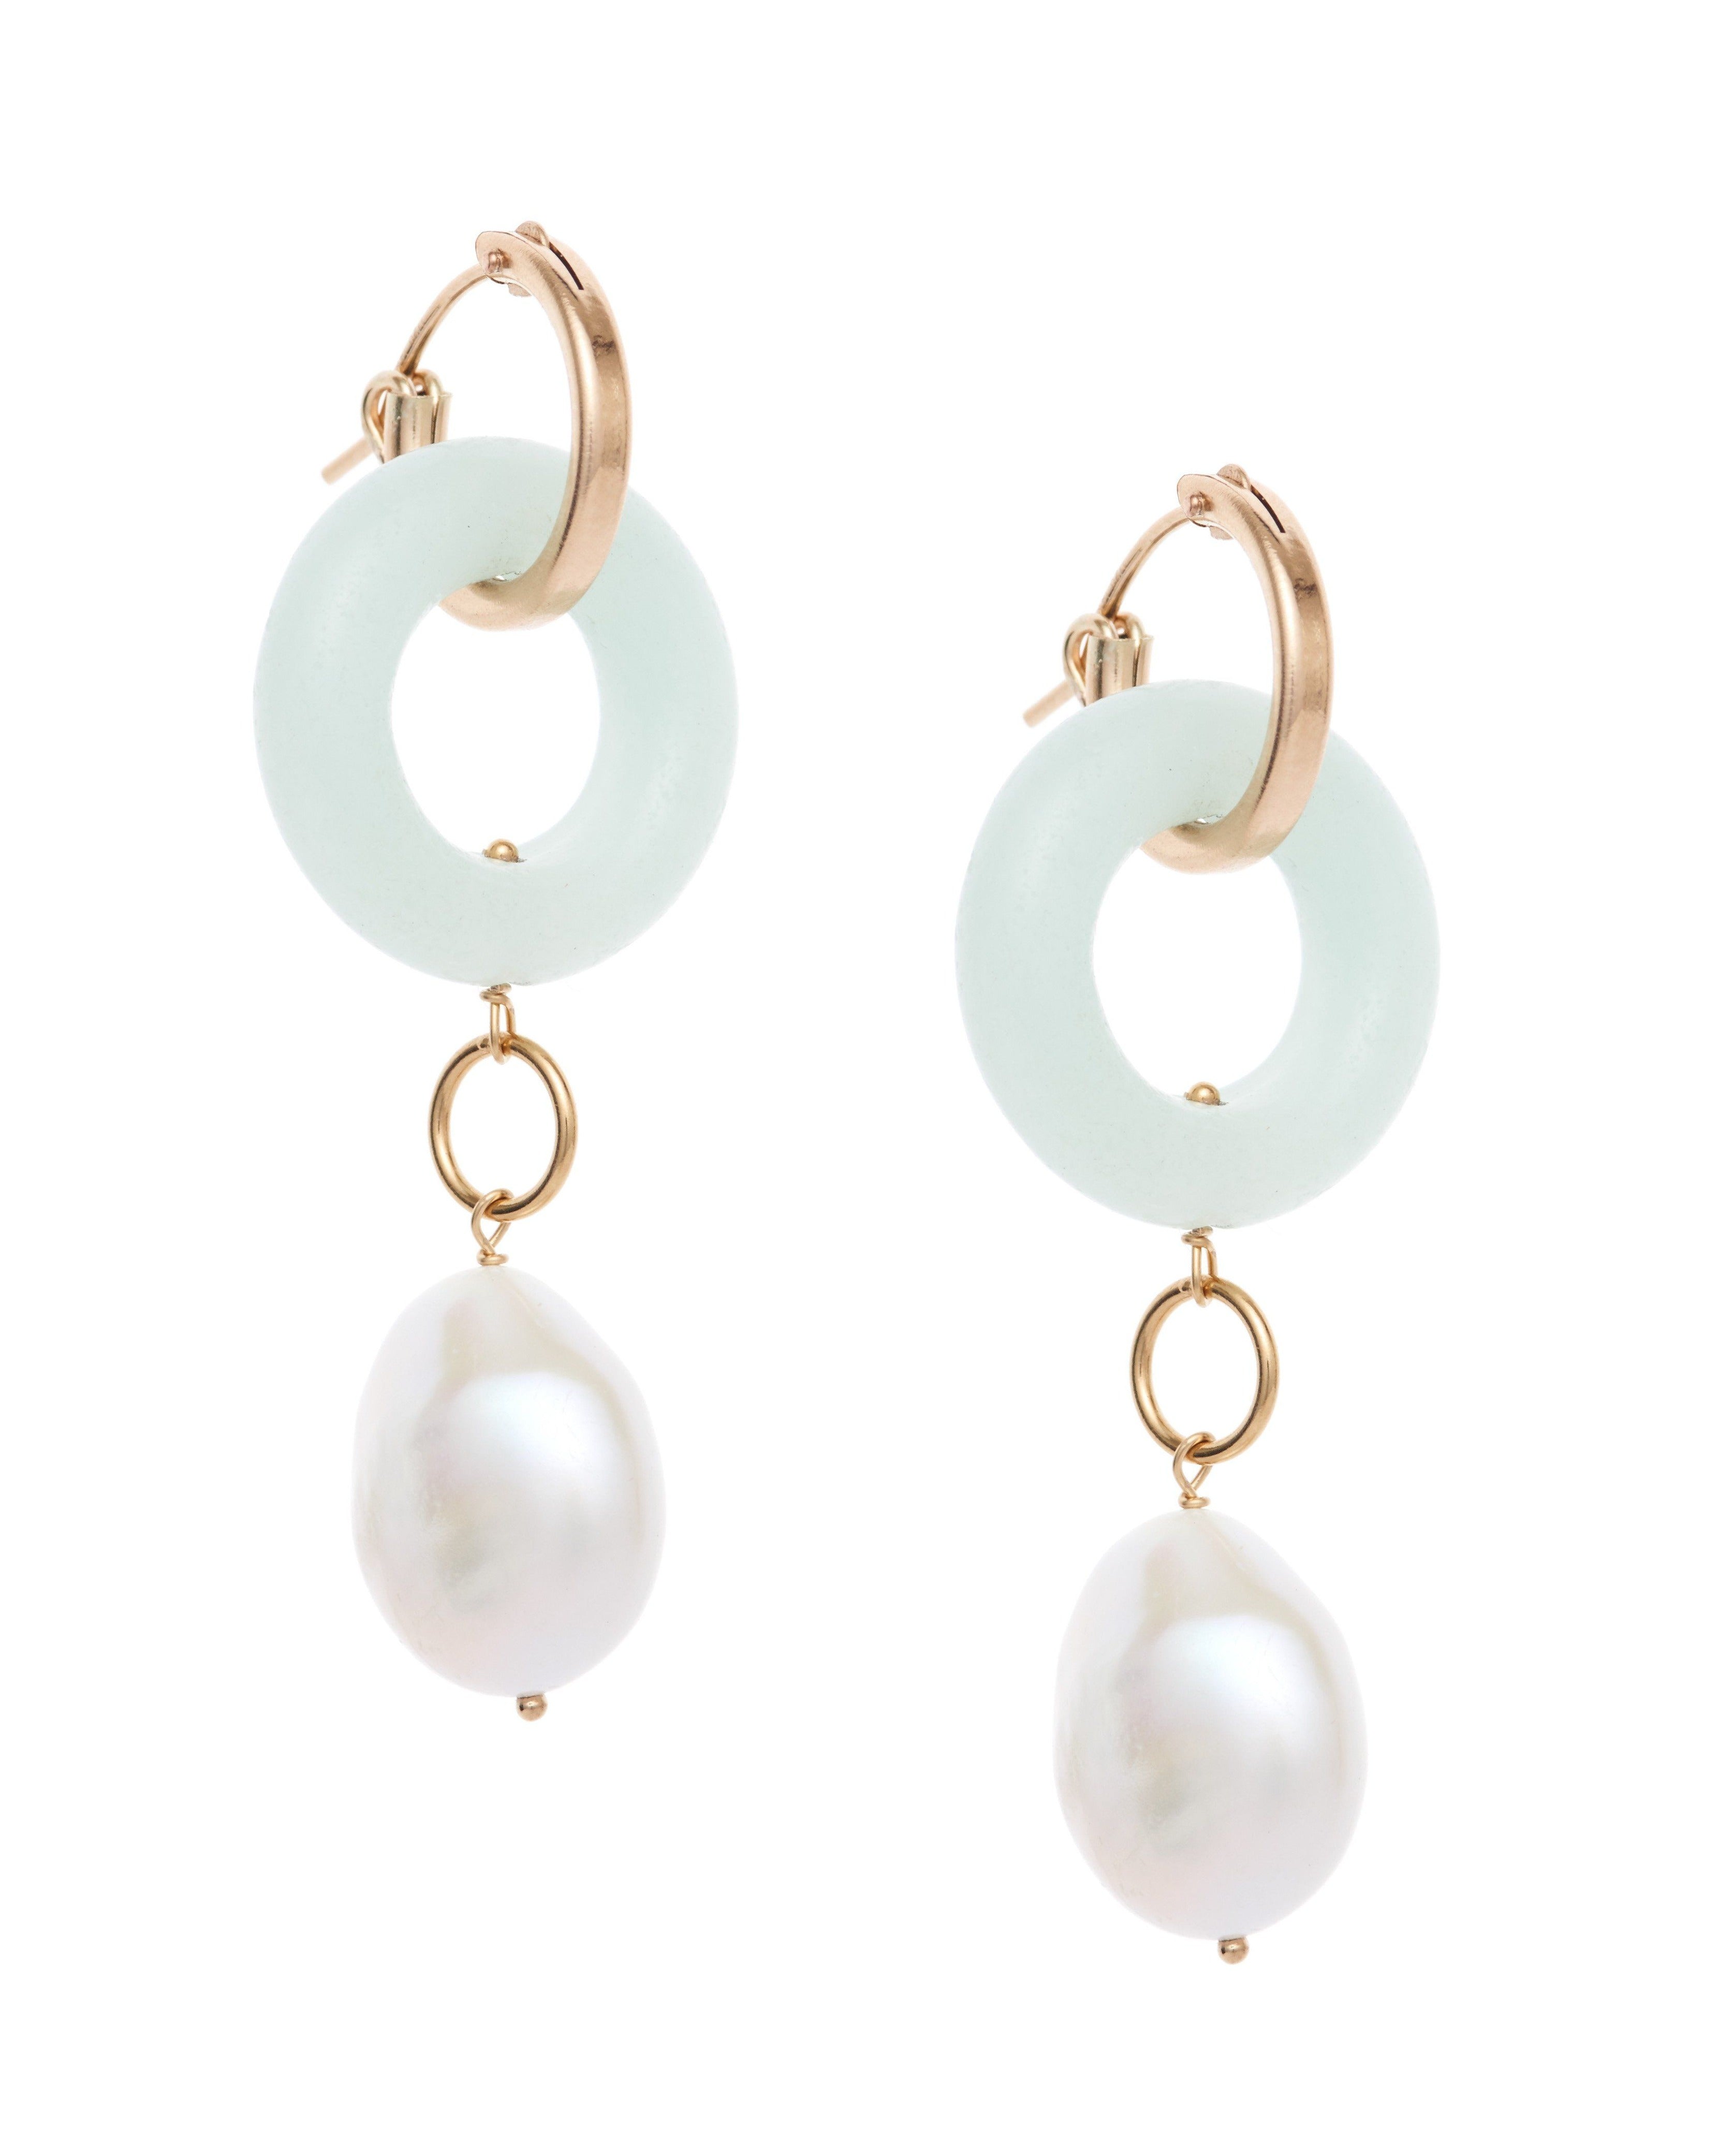 Cerceau Pearl Hoops by Kozakh. 15mm hoop dangling earrings with snap closure, crafted in 14K Gold Filled, featuring a doughnut shape Amazonite gemstone and a Baroque Pearl.